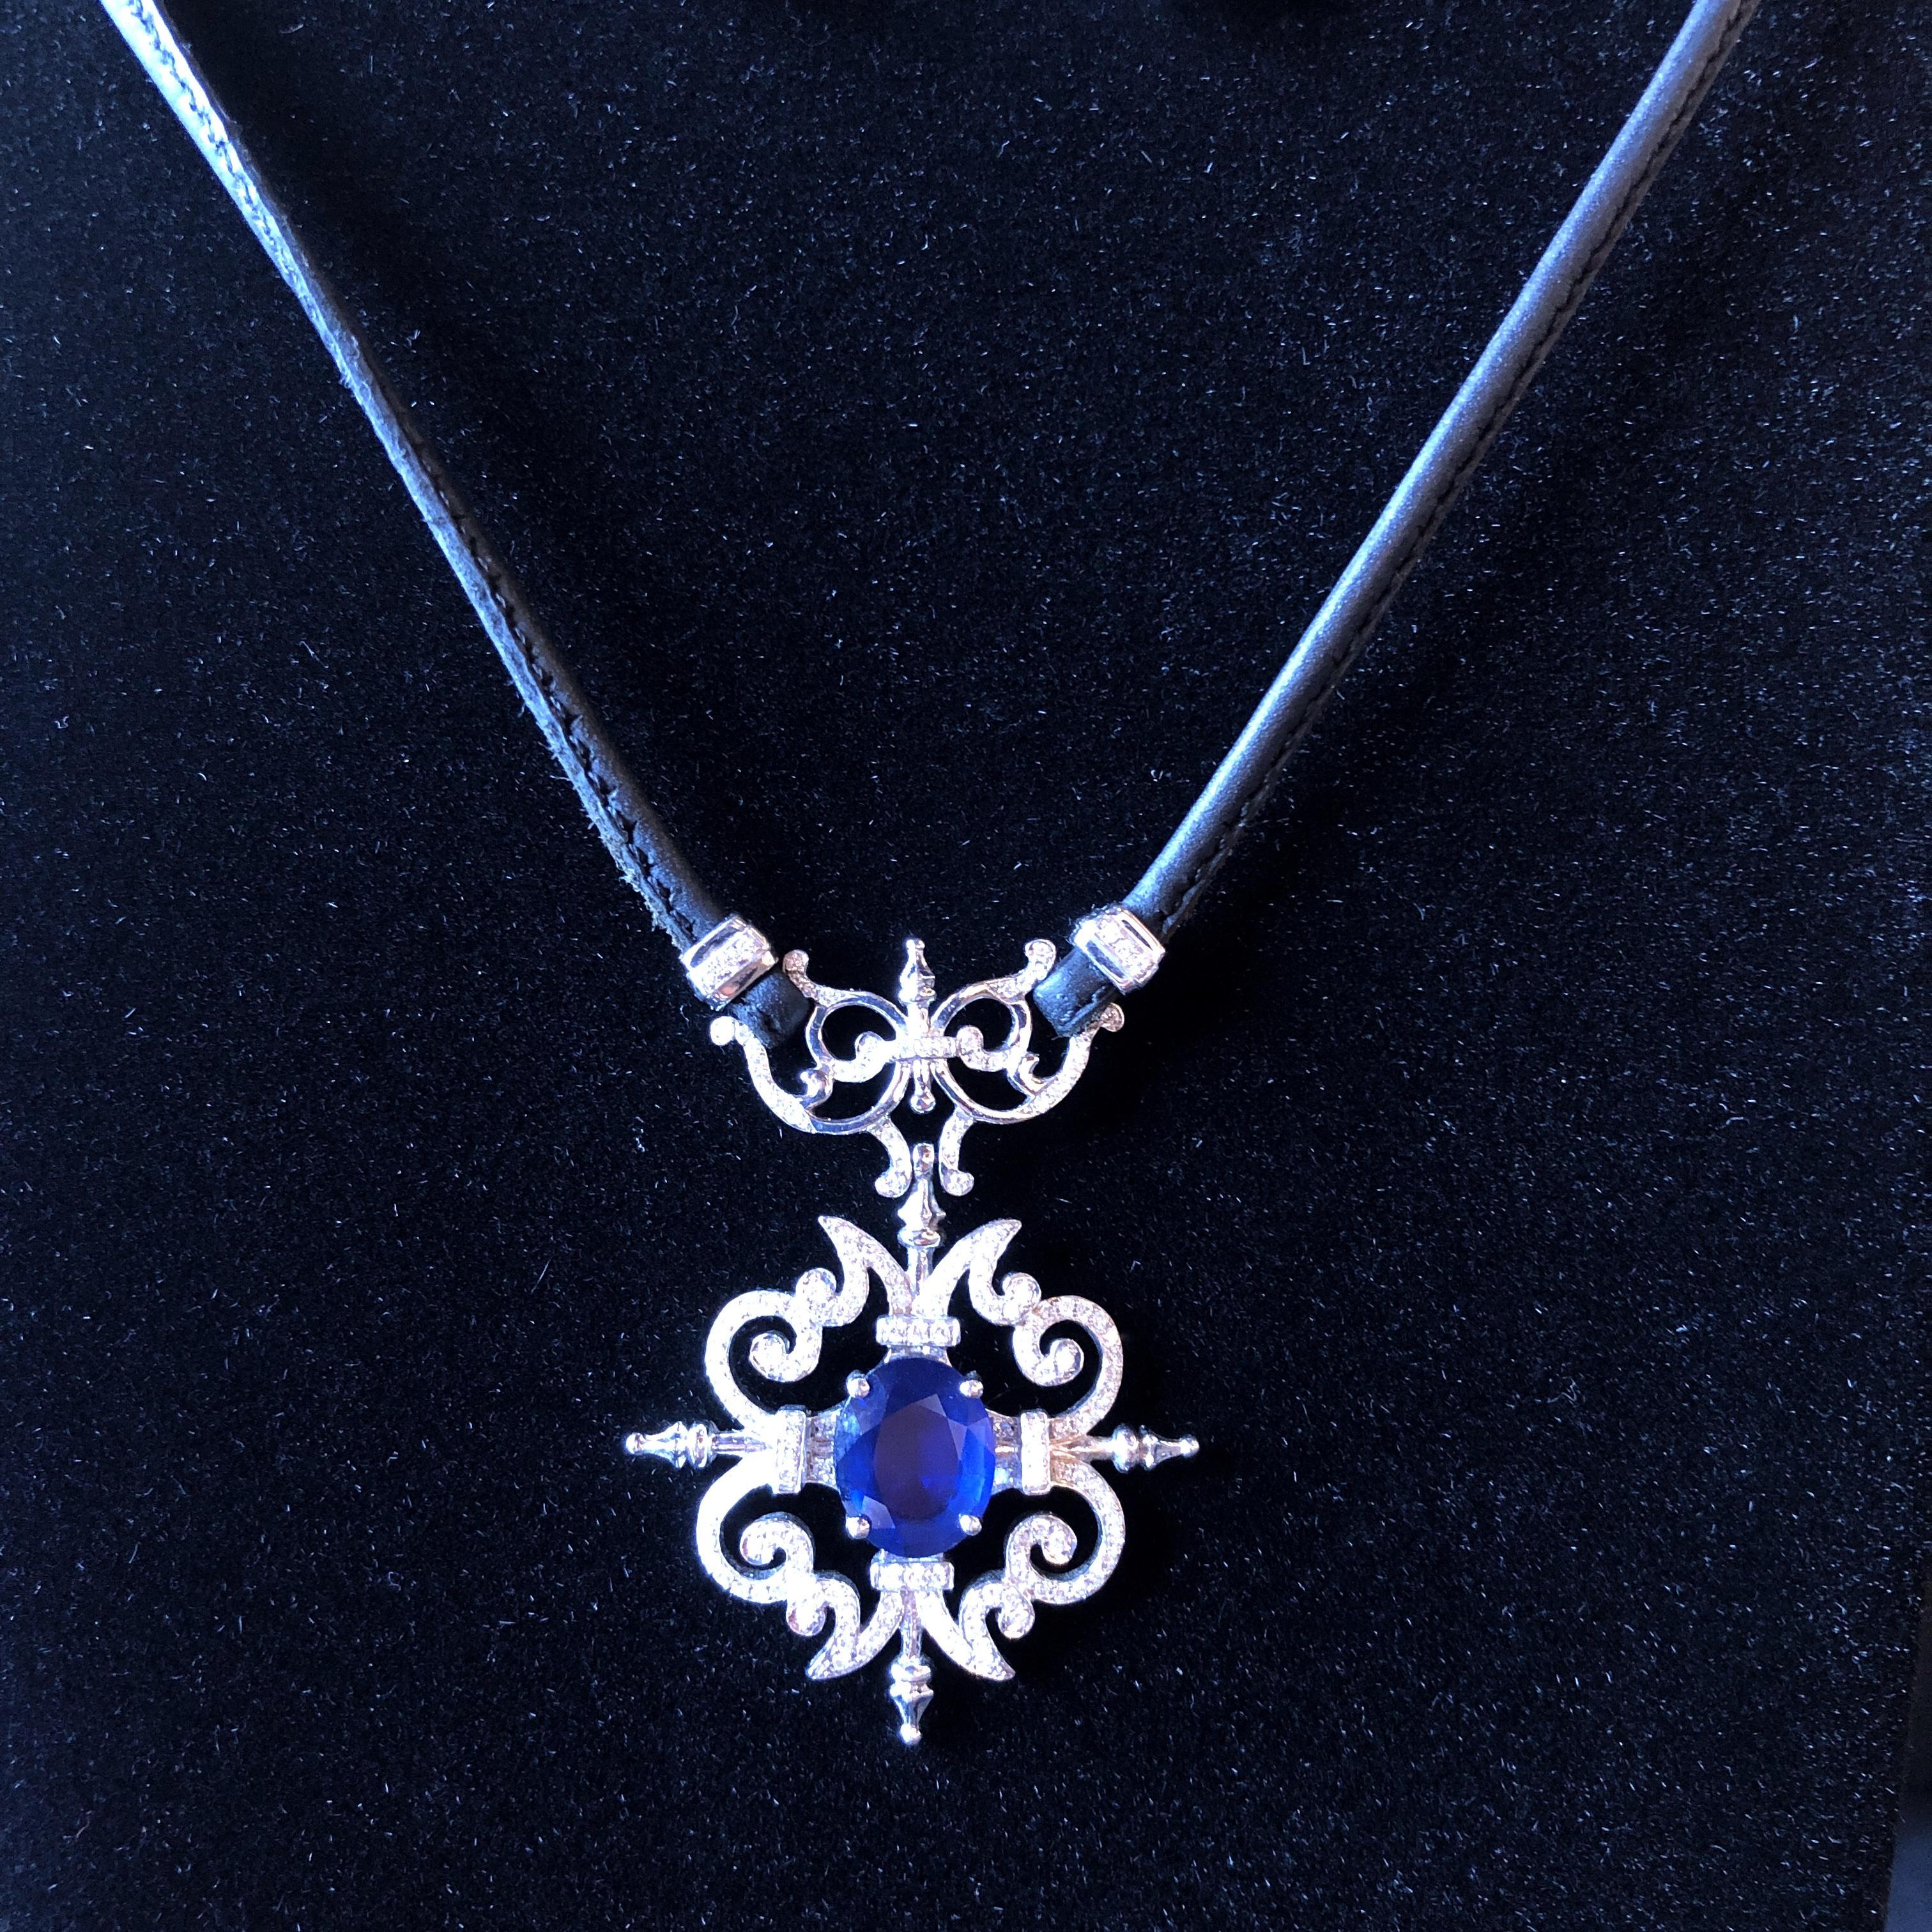 Paul Morelli Garden Gate Sapphire on Leather Necklace in White Gold
Sapphire approximately (3.10ctw) and White Diamonds (0.87ctw) 16 inch 16.9 grams total weight.
MATCHING EARRINGS SOLD SEPARATELY
Paul Morelli has built his career as one of